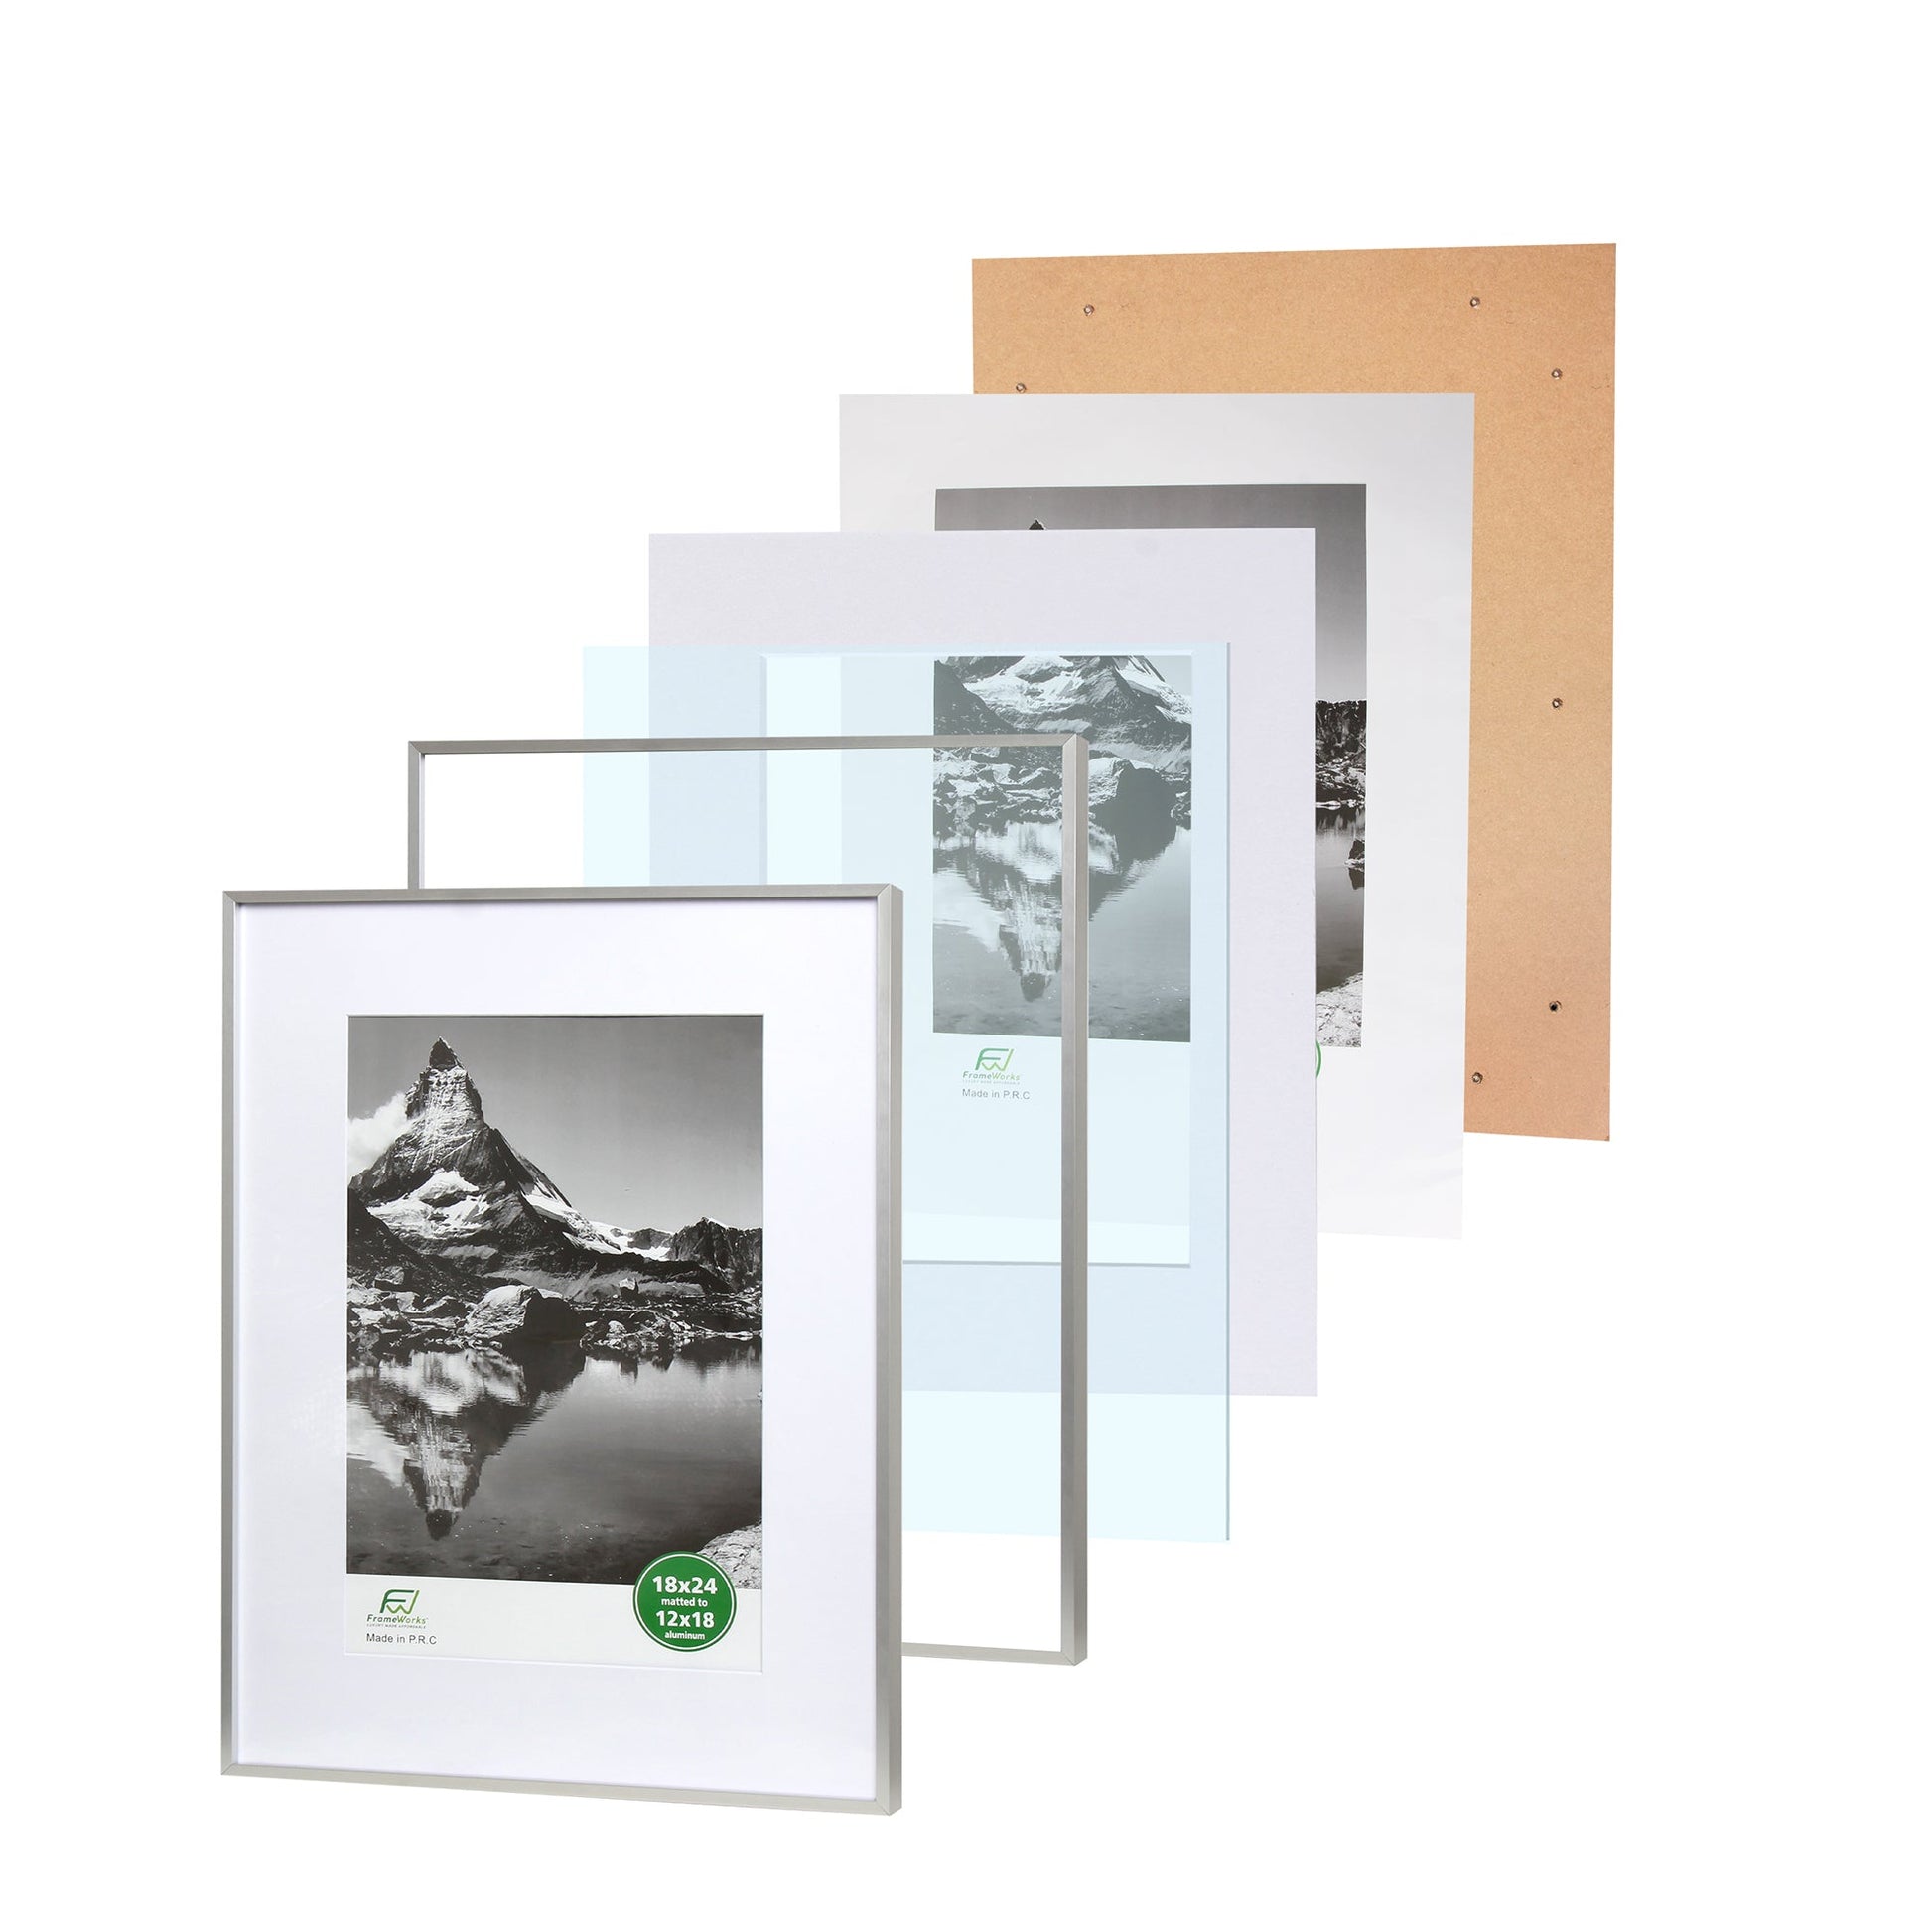 18" x 24" Deluxe Silver Aluminum Contemporary Picture Frame, 12" x 18" Matted